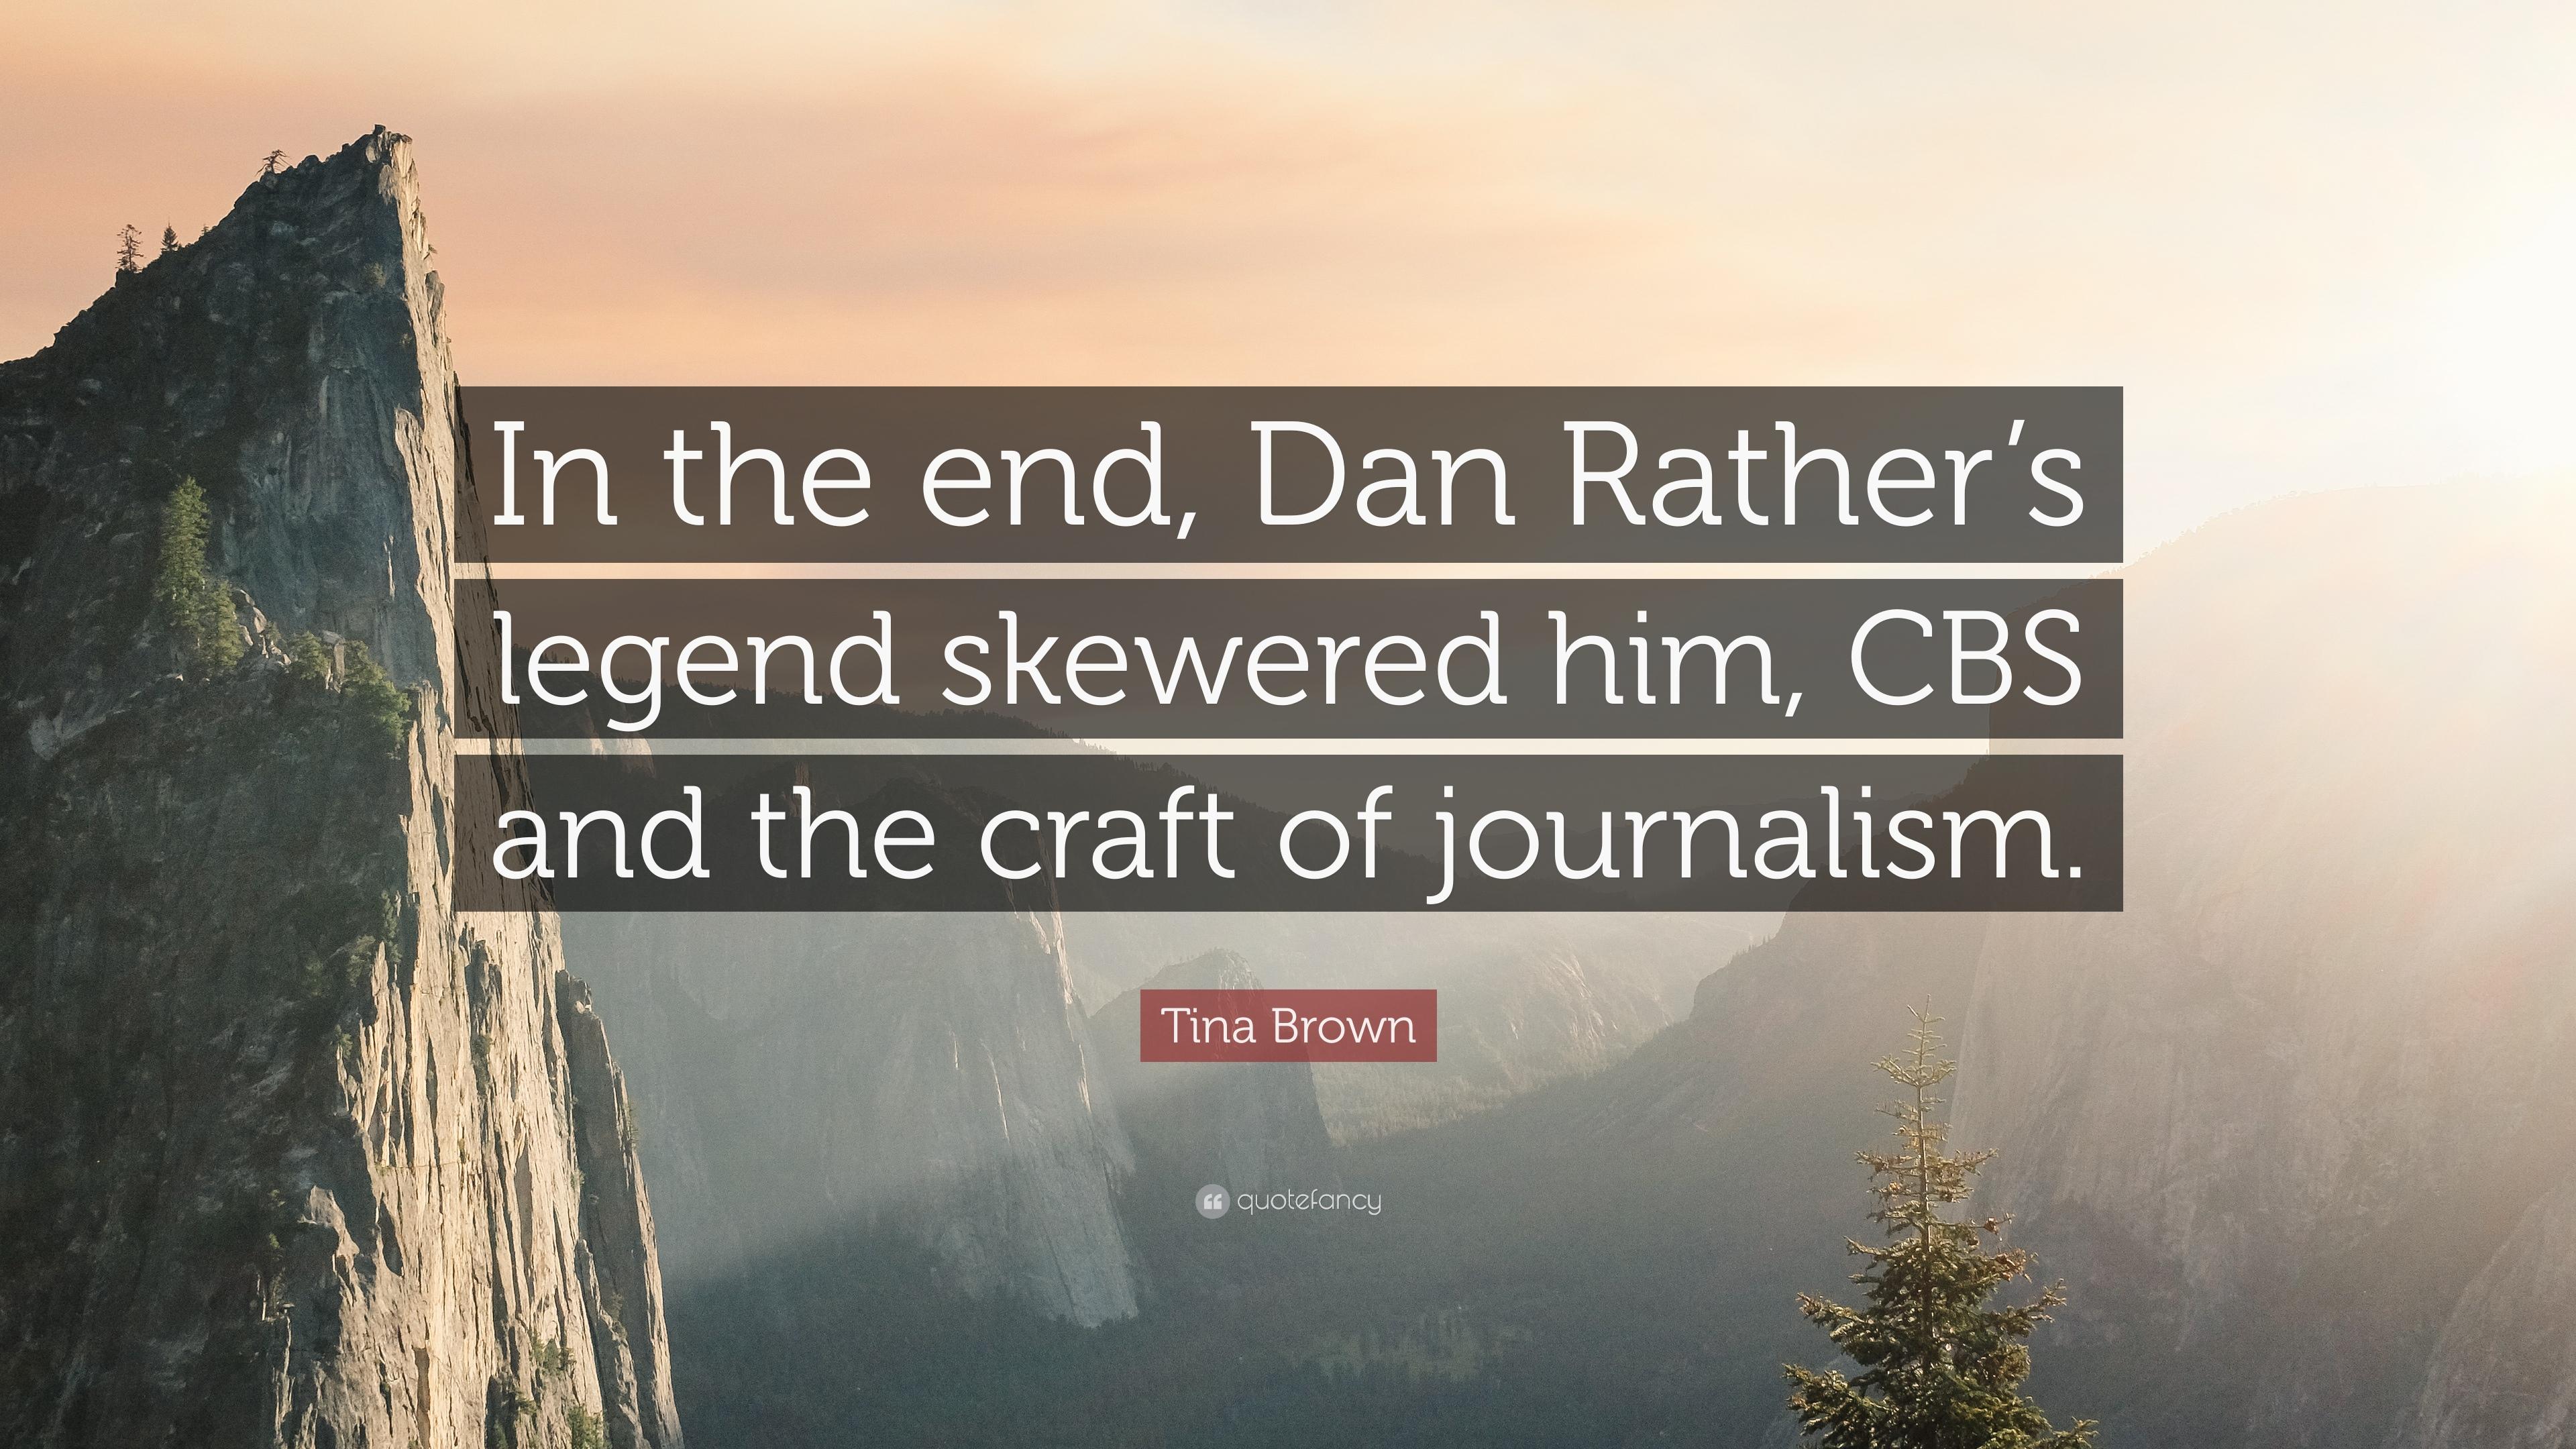 Tina Brown Quote: “In the end, Dan Rather's legend skewered him, CBS